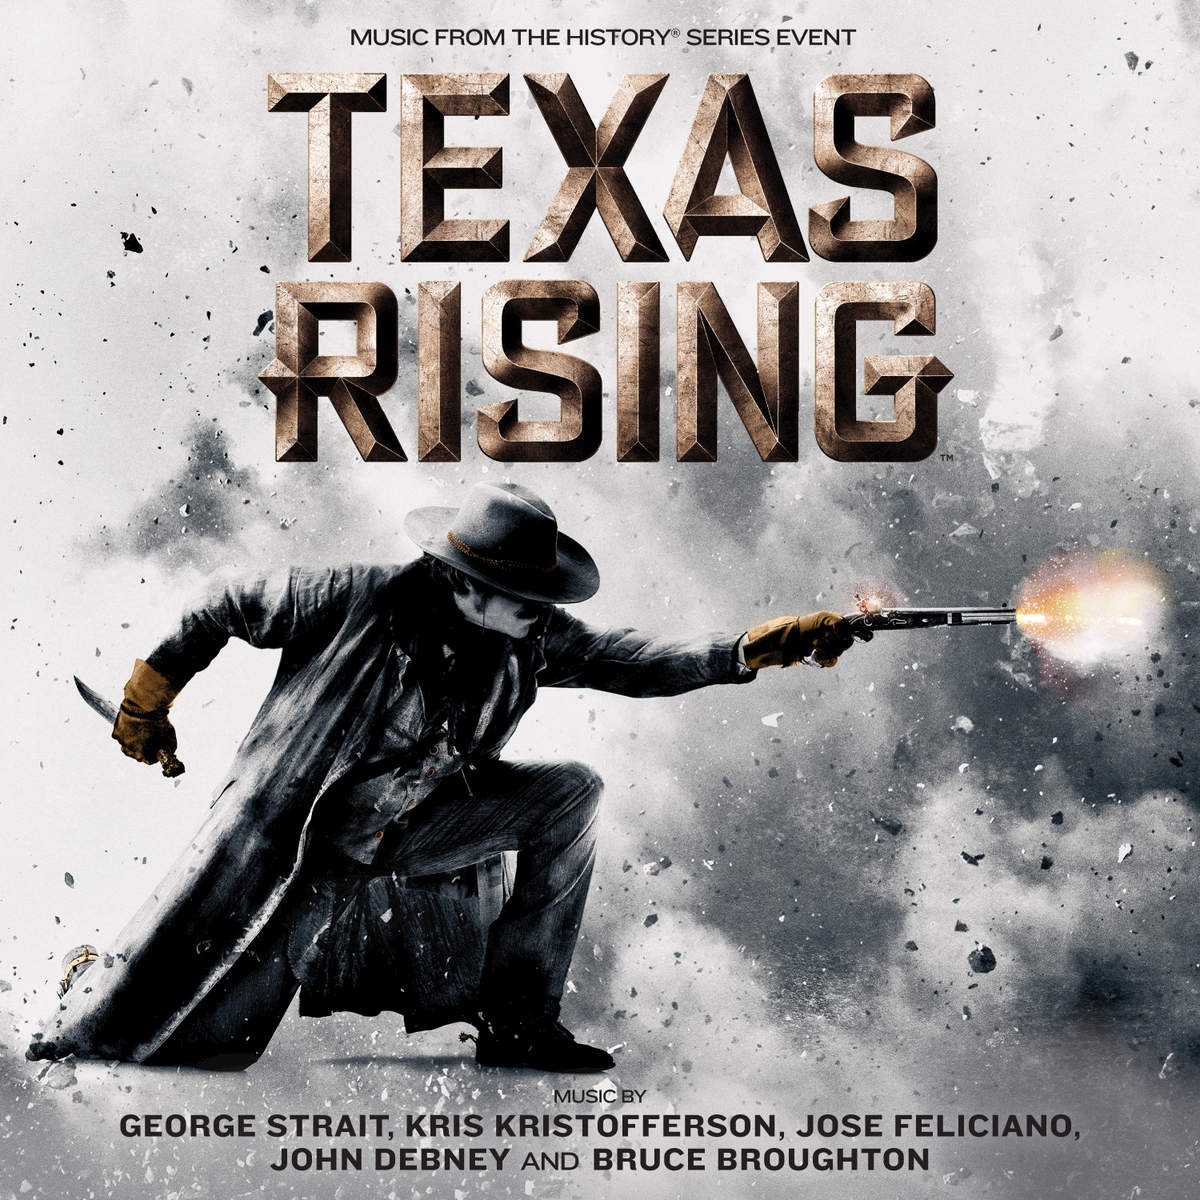 Lupe Watches Deaf Ride Off  From " Texas Rising" Mini Series Soundtrack